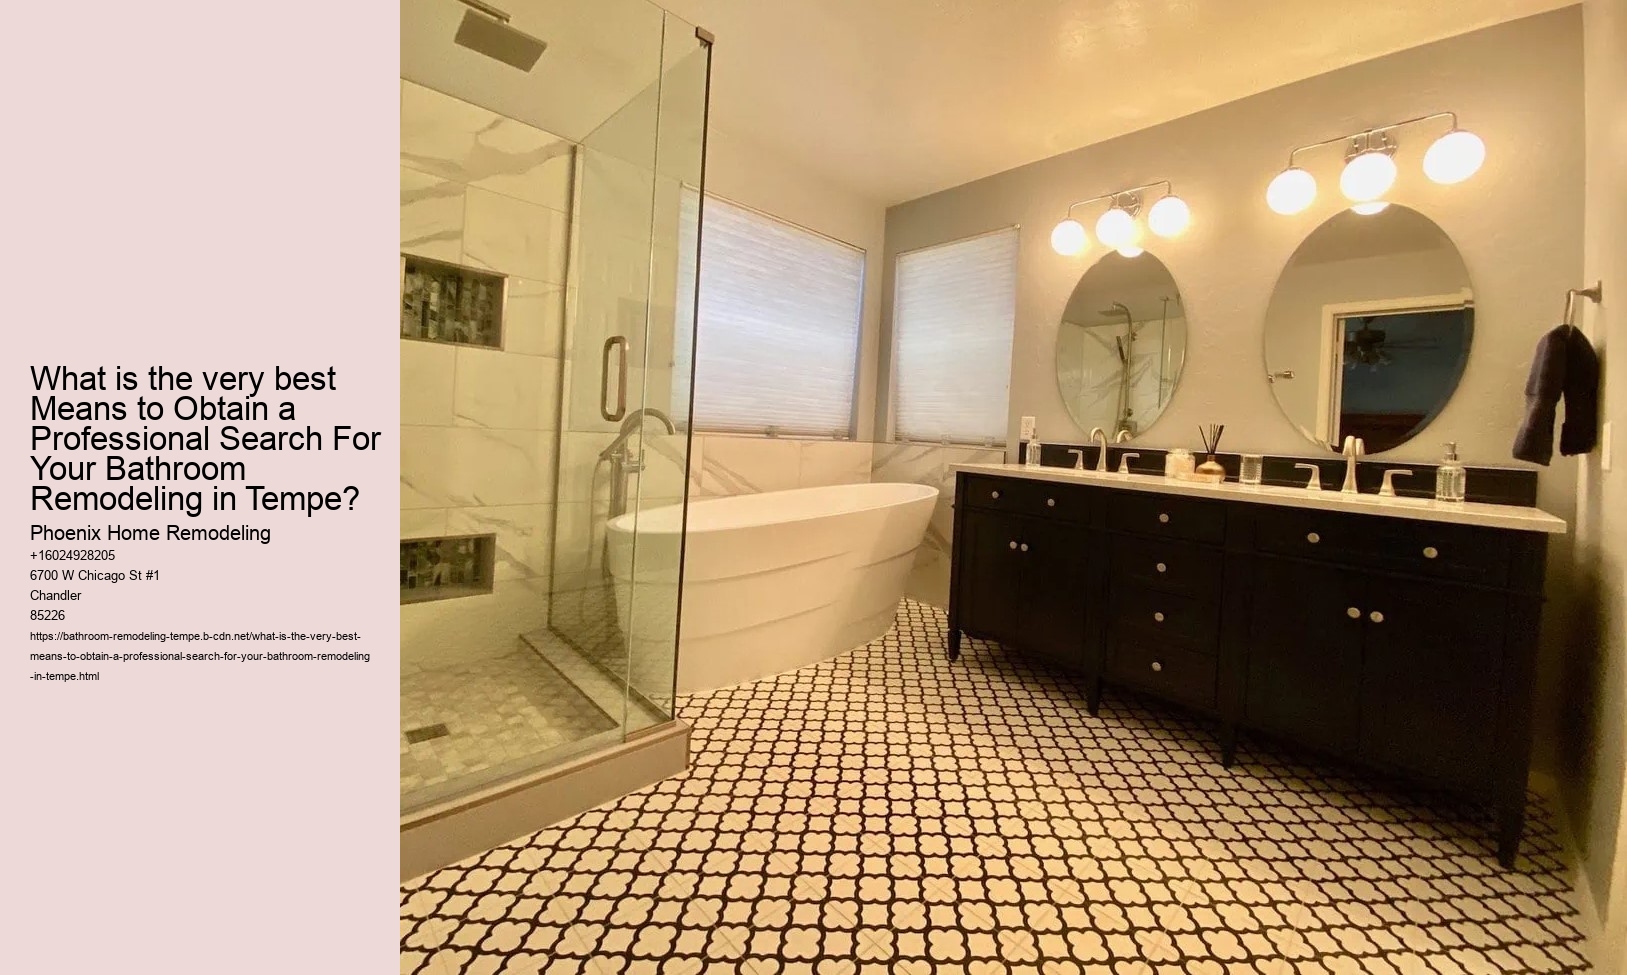 What is the very best Means to Obtain a Professional Search For Your Bathroom Remodeling in Tempe?